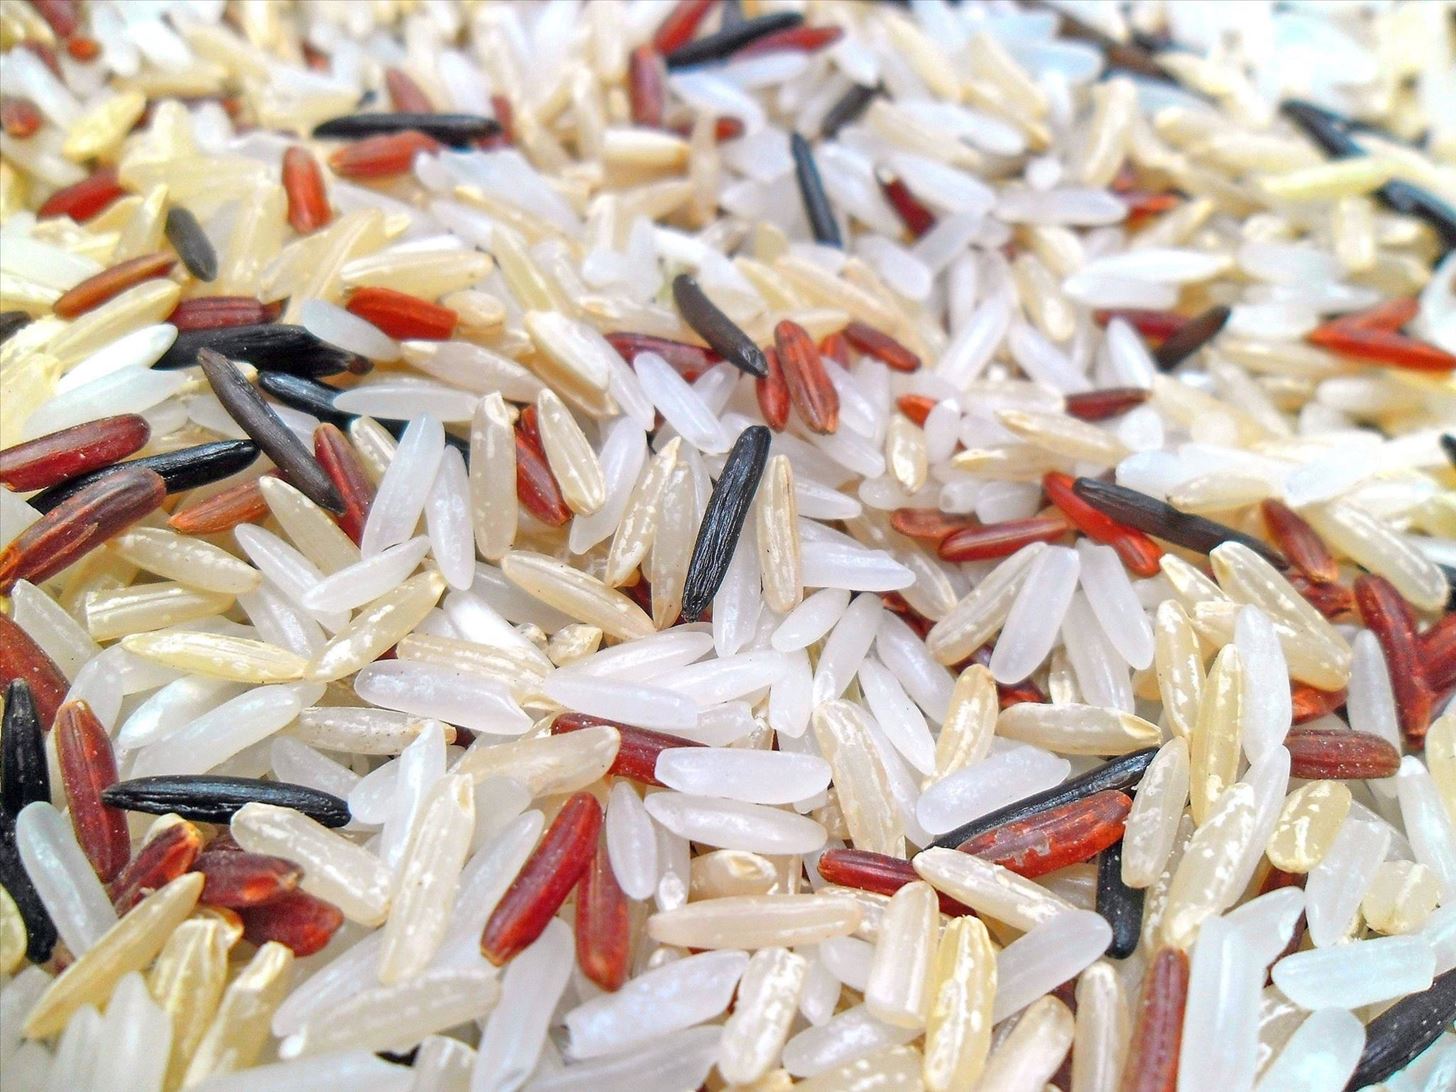 Ingredients 101: Why Properly Rinsing Rice, Barley, Farro & Quinoa Is So Damn Important